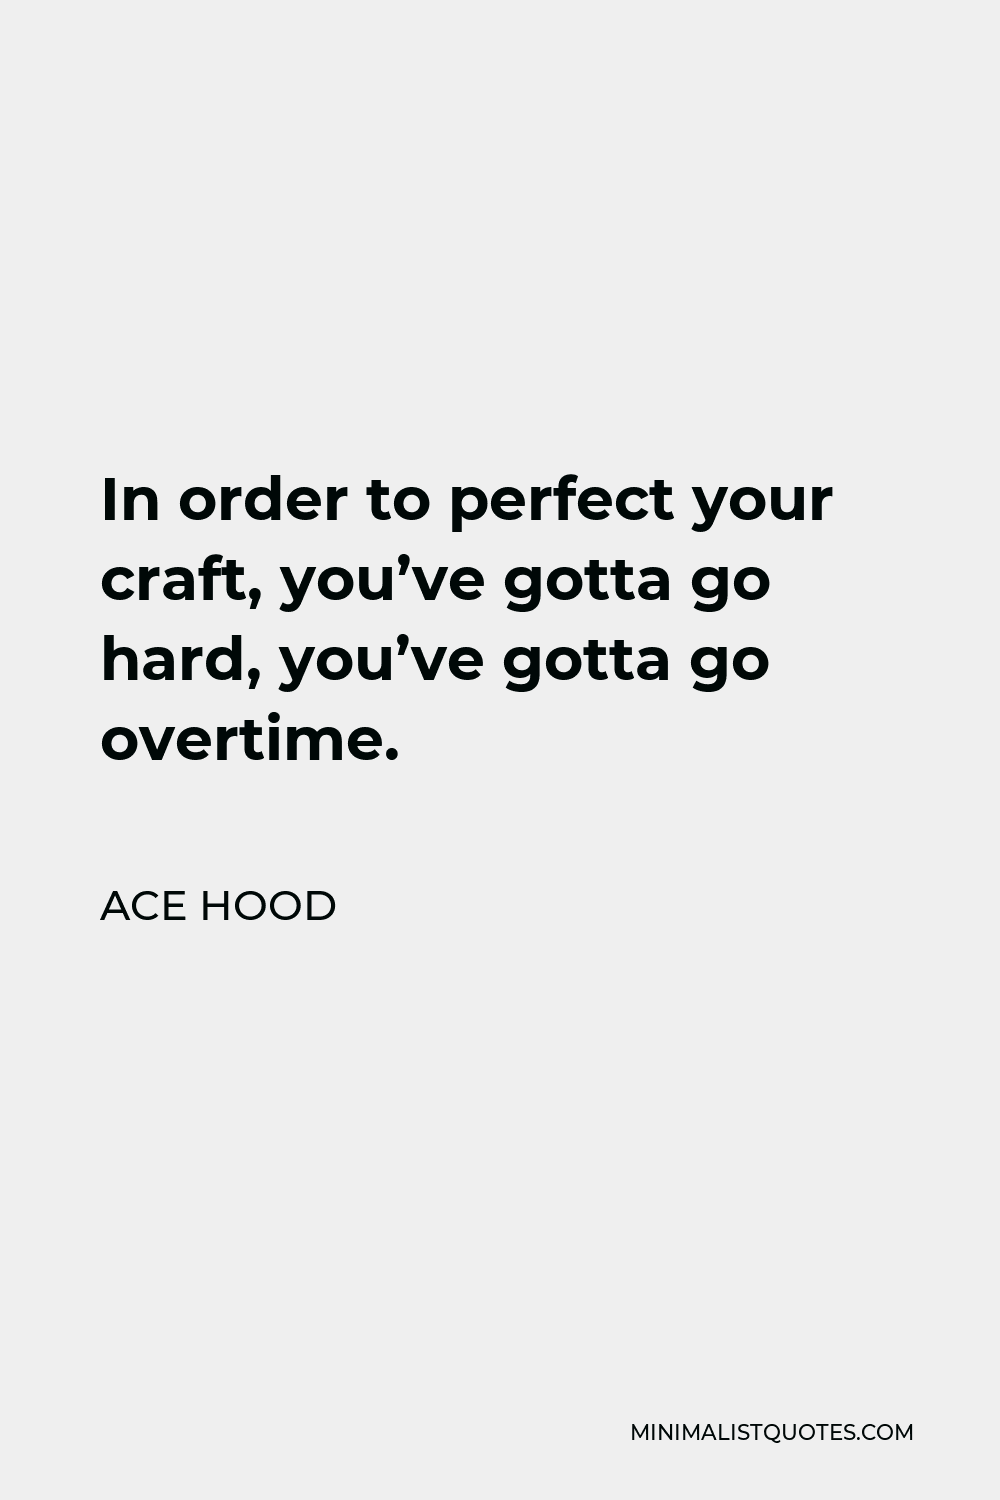 Ace Hood Quote - In order to perfect your craft, you’ve gotta go hard, you’ve gotta go overtime.